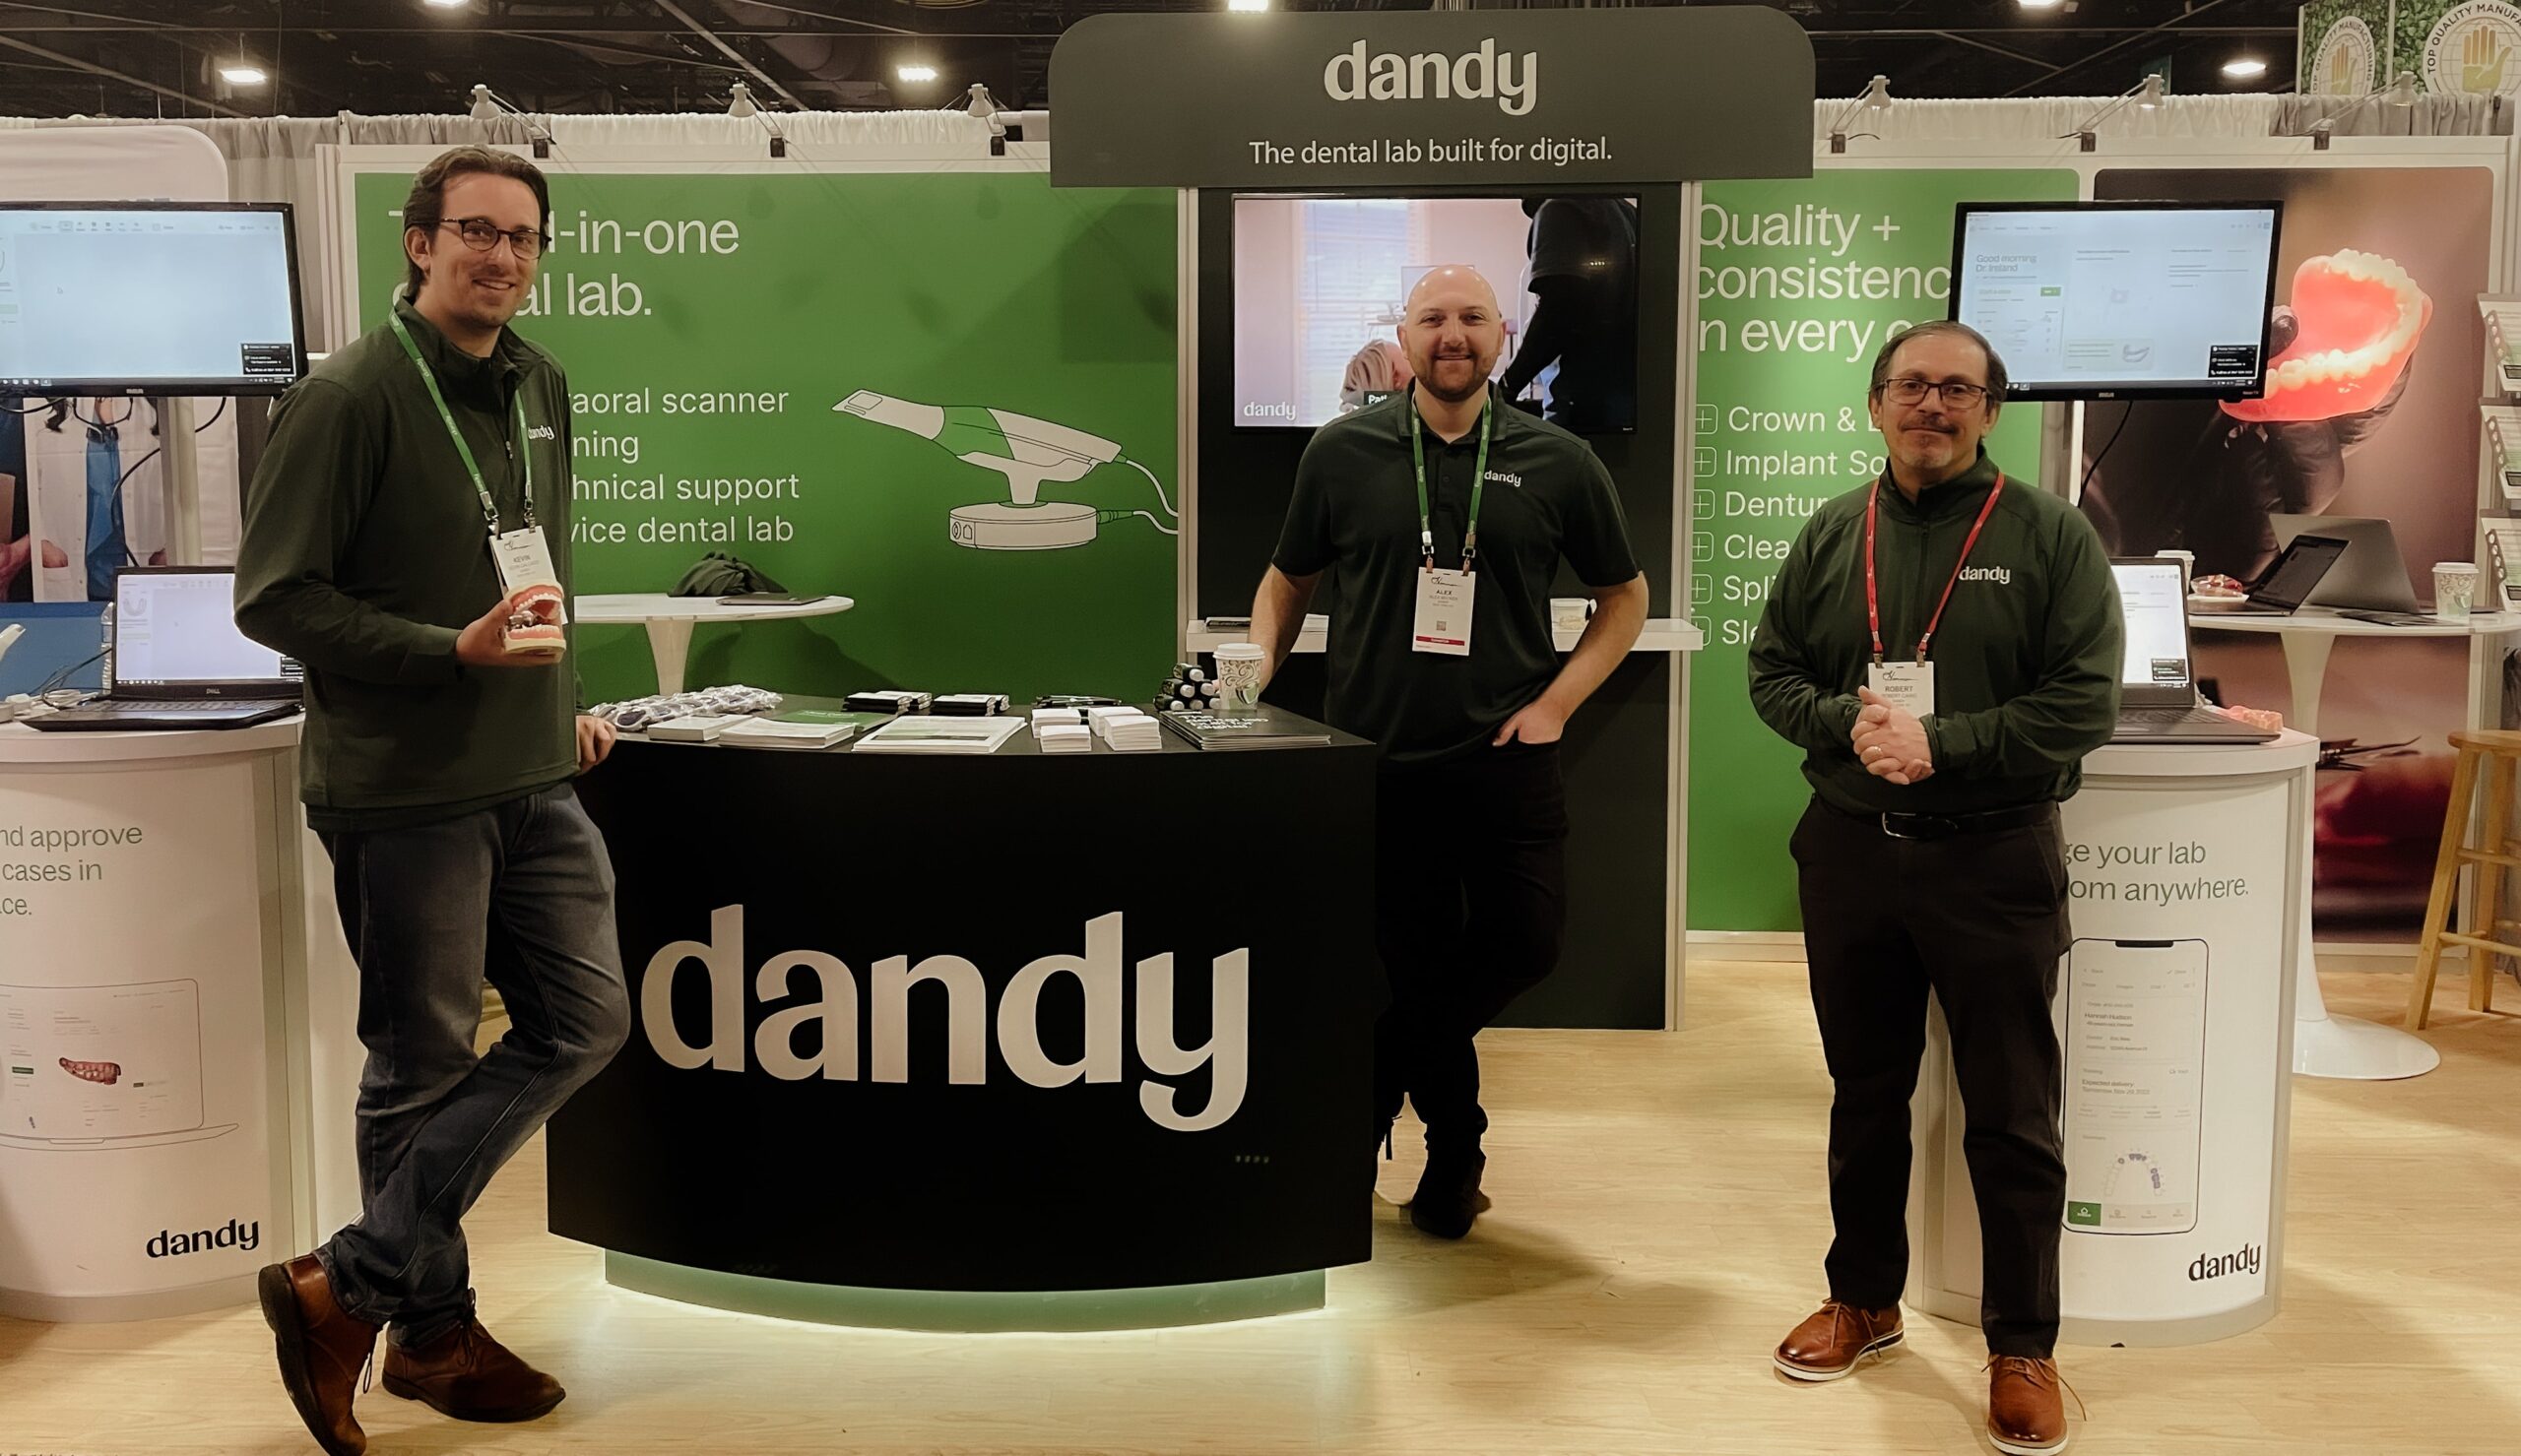 Dandy at dental events and conferences